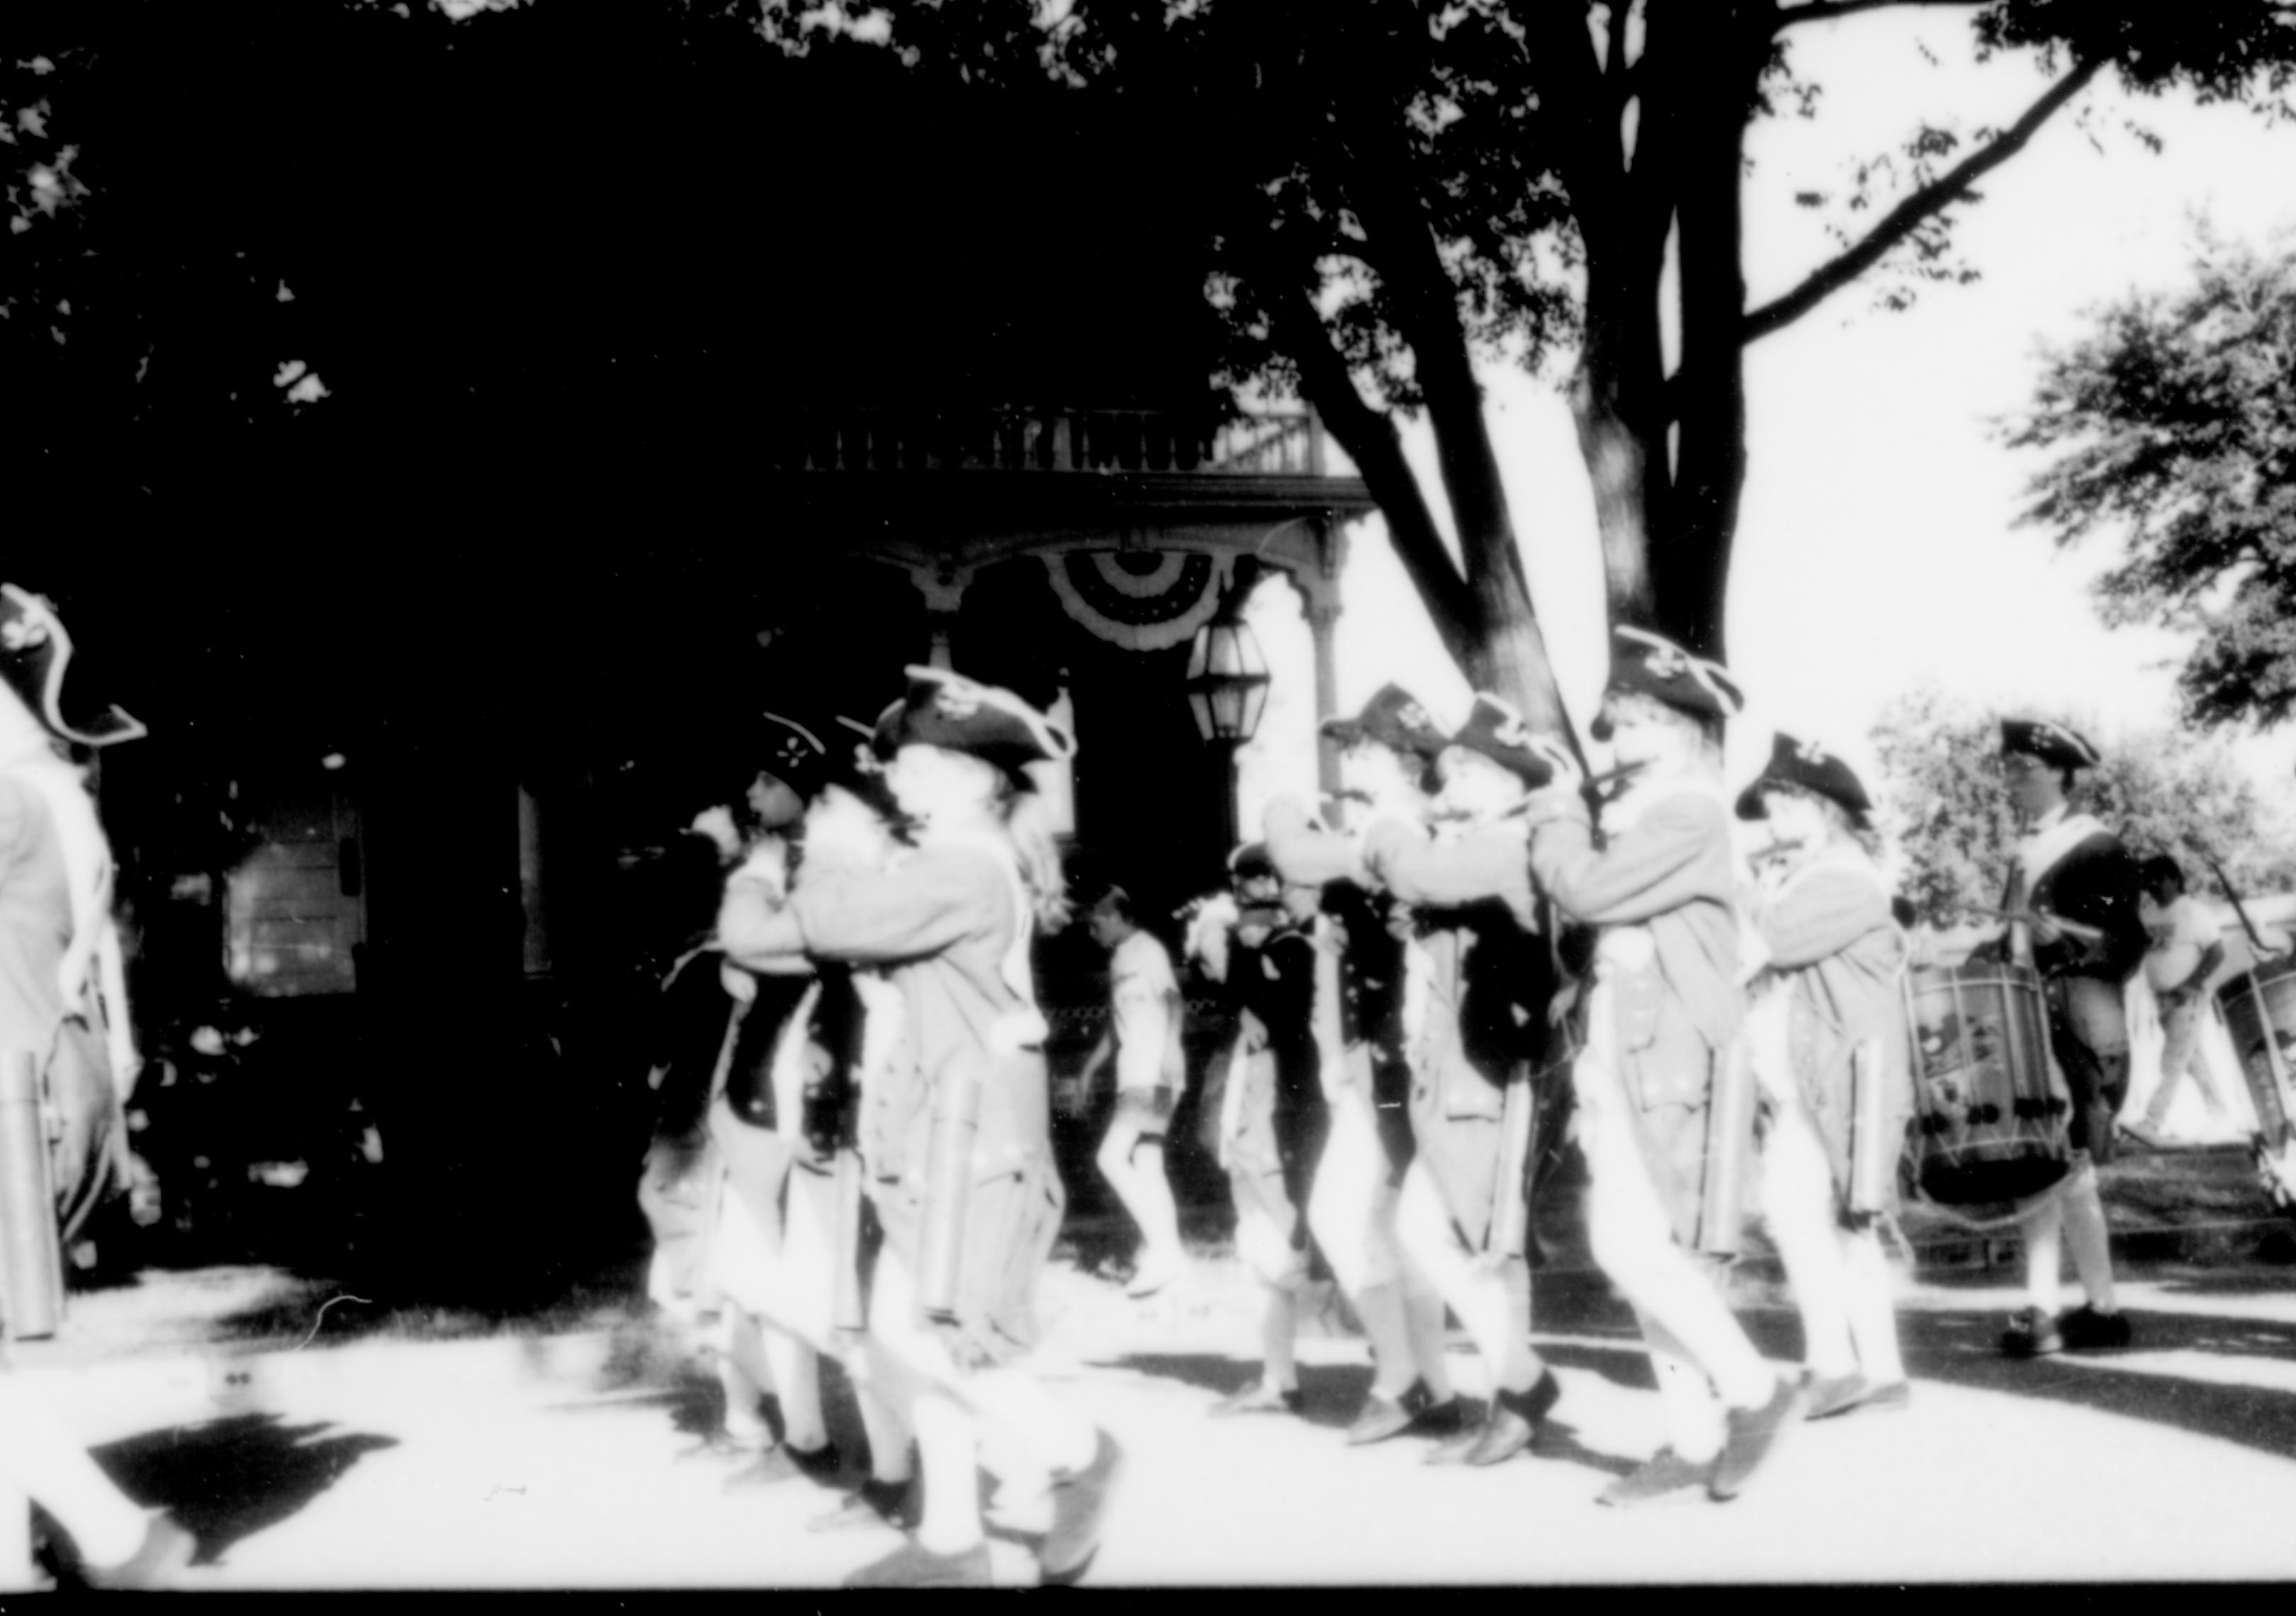 Fife and Drum Corps marching in front of Conference Center of Lincoln Home NHS, during the Lincoln Festival. (69?) Photographer facing east.